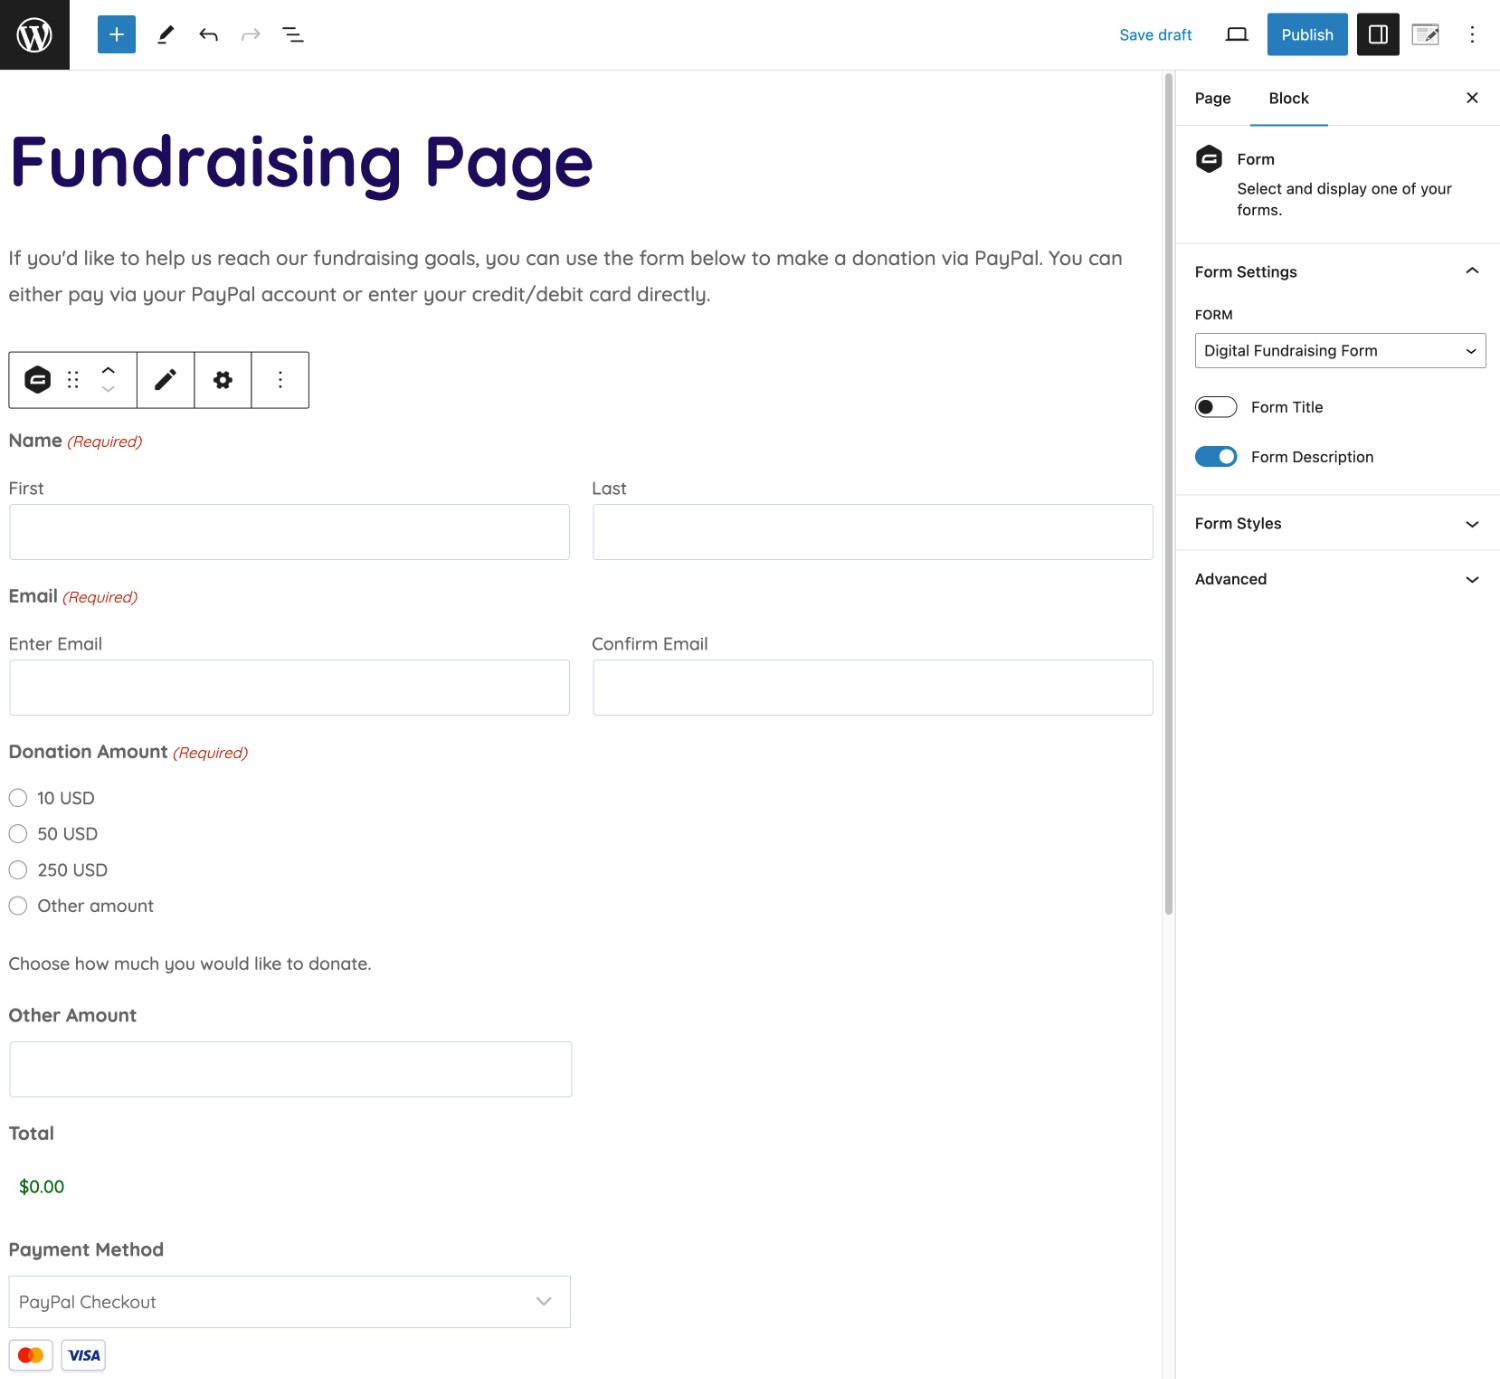 How to embed your digital fundraising form